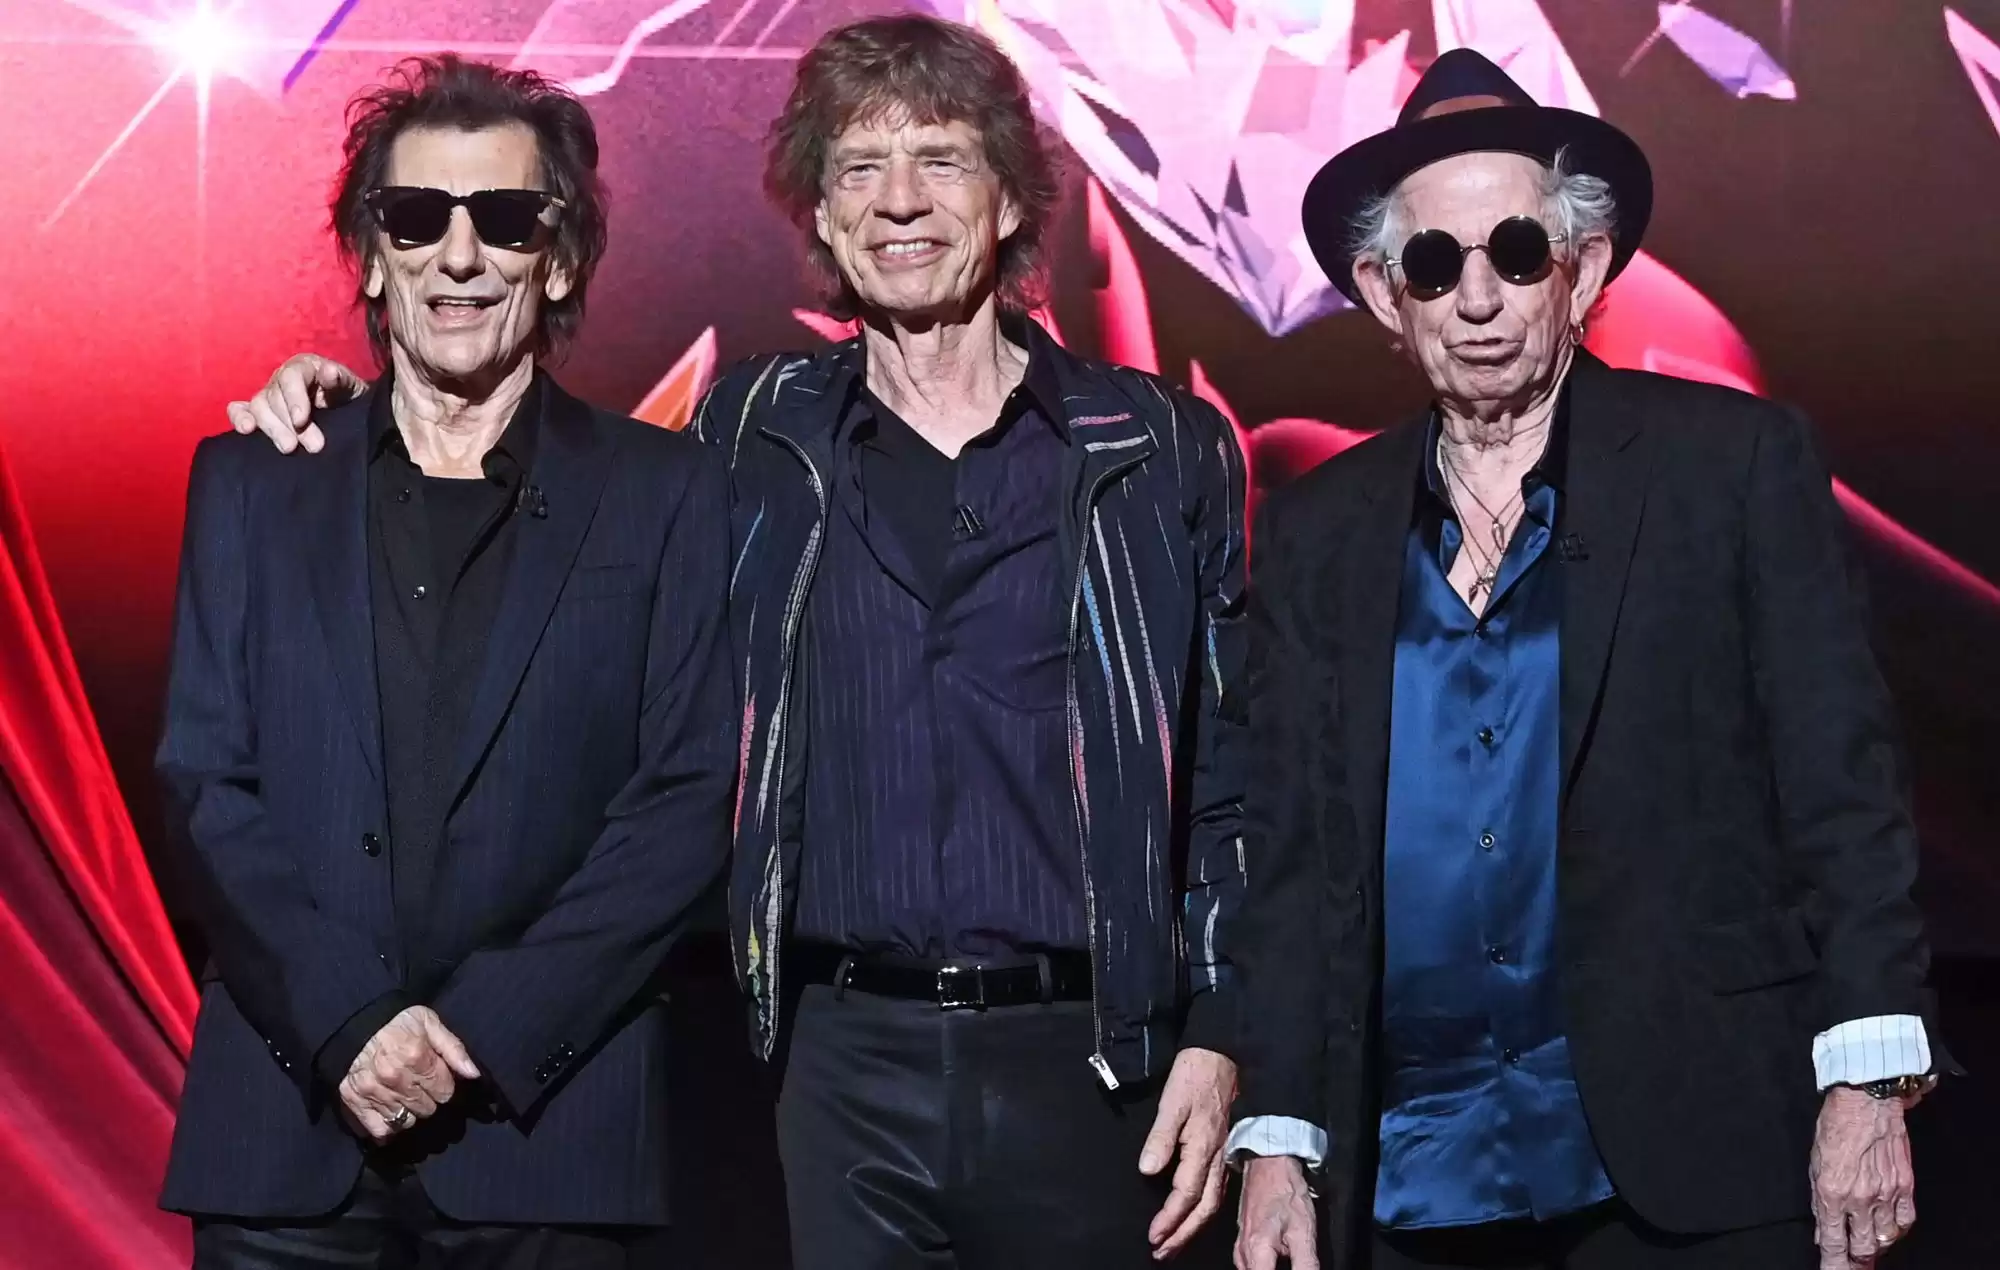 Fans react to The Rolling Stones US tour sponsored by American Association of Retired Persons